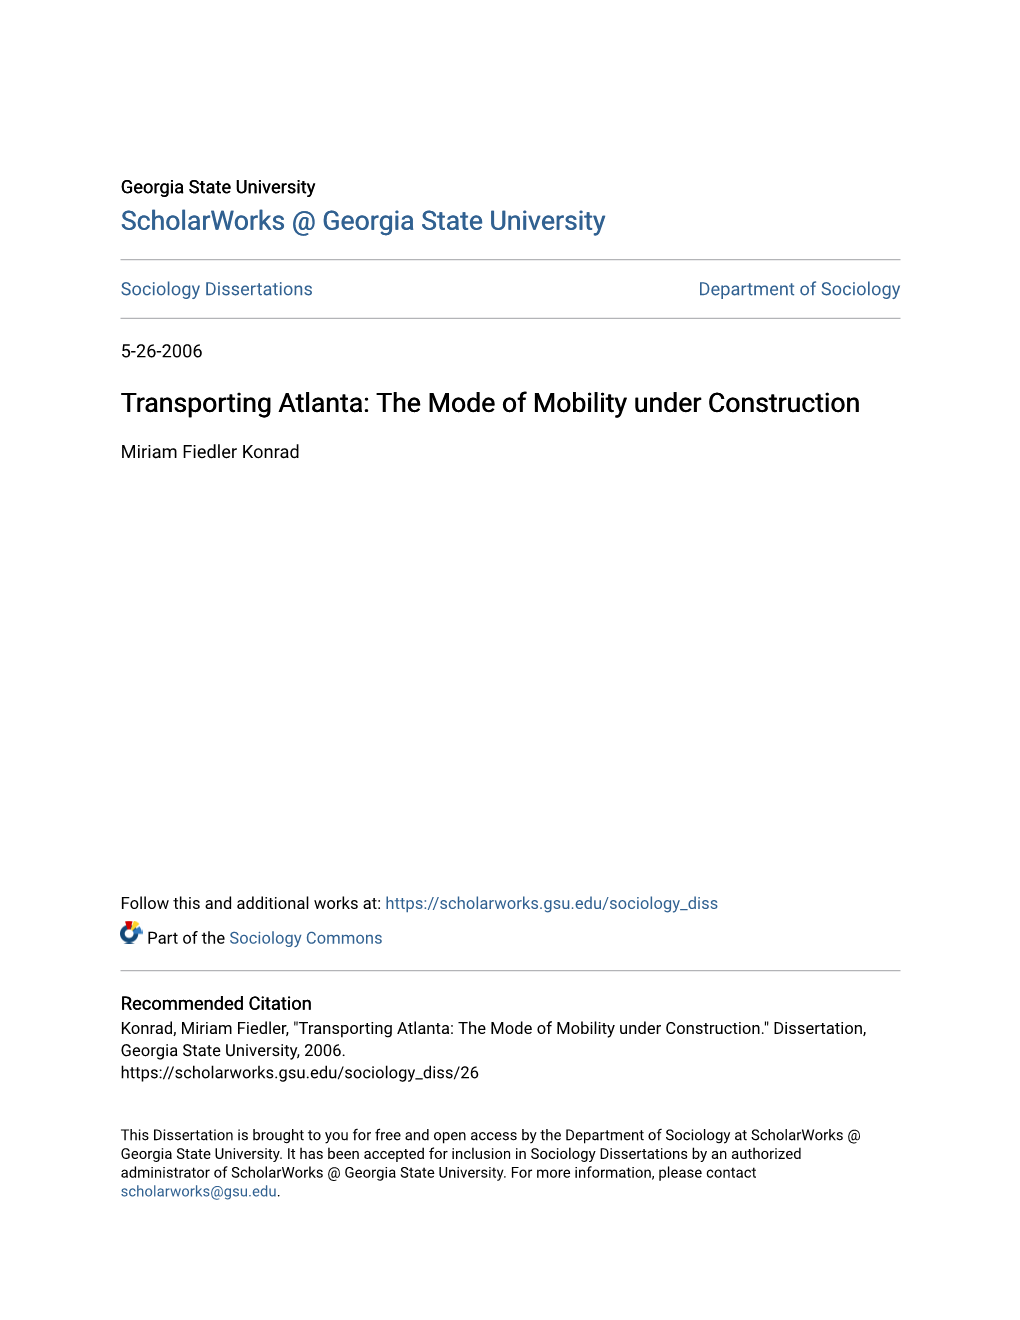 Transporting Atlanta: the Mode of Mobility Under Construction